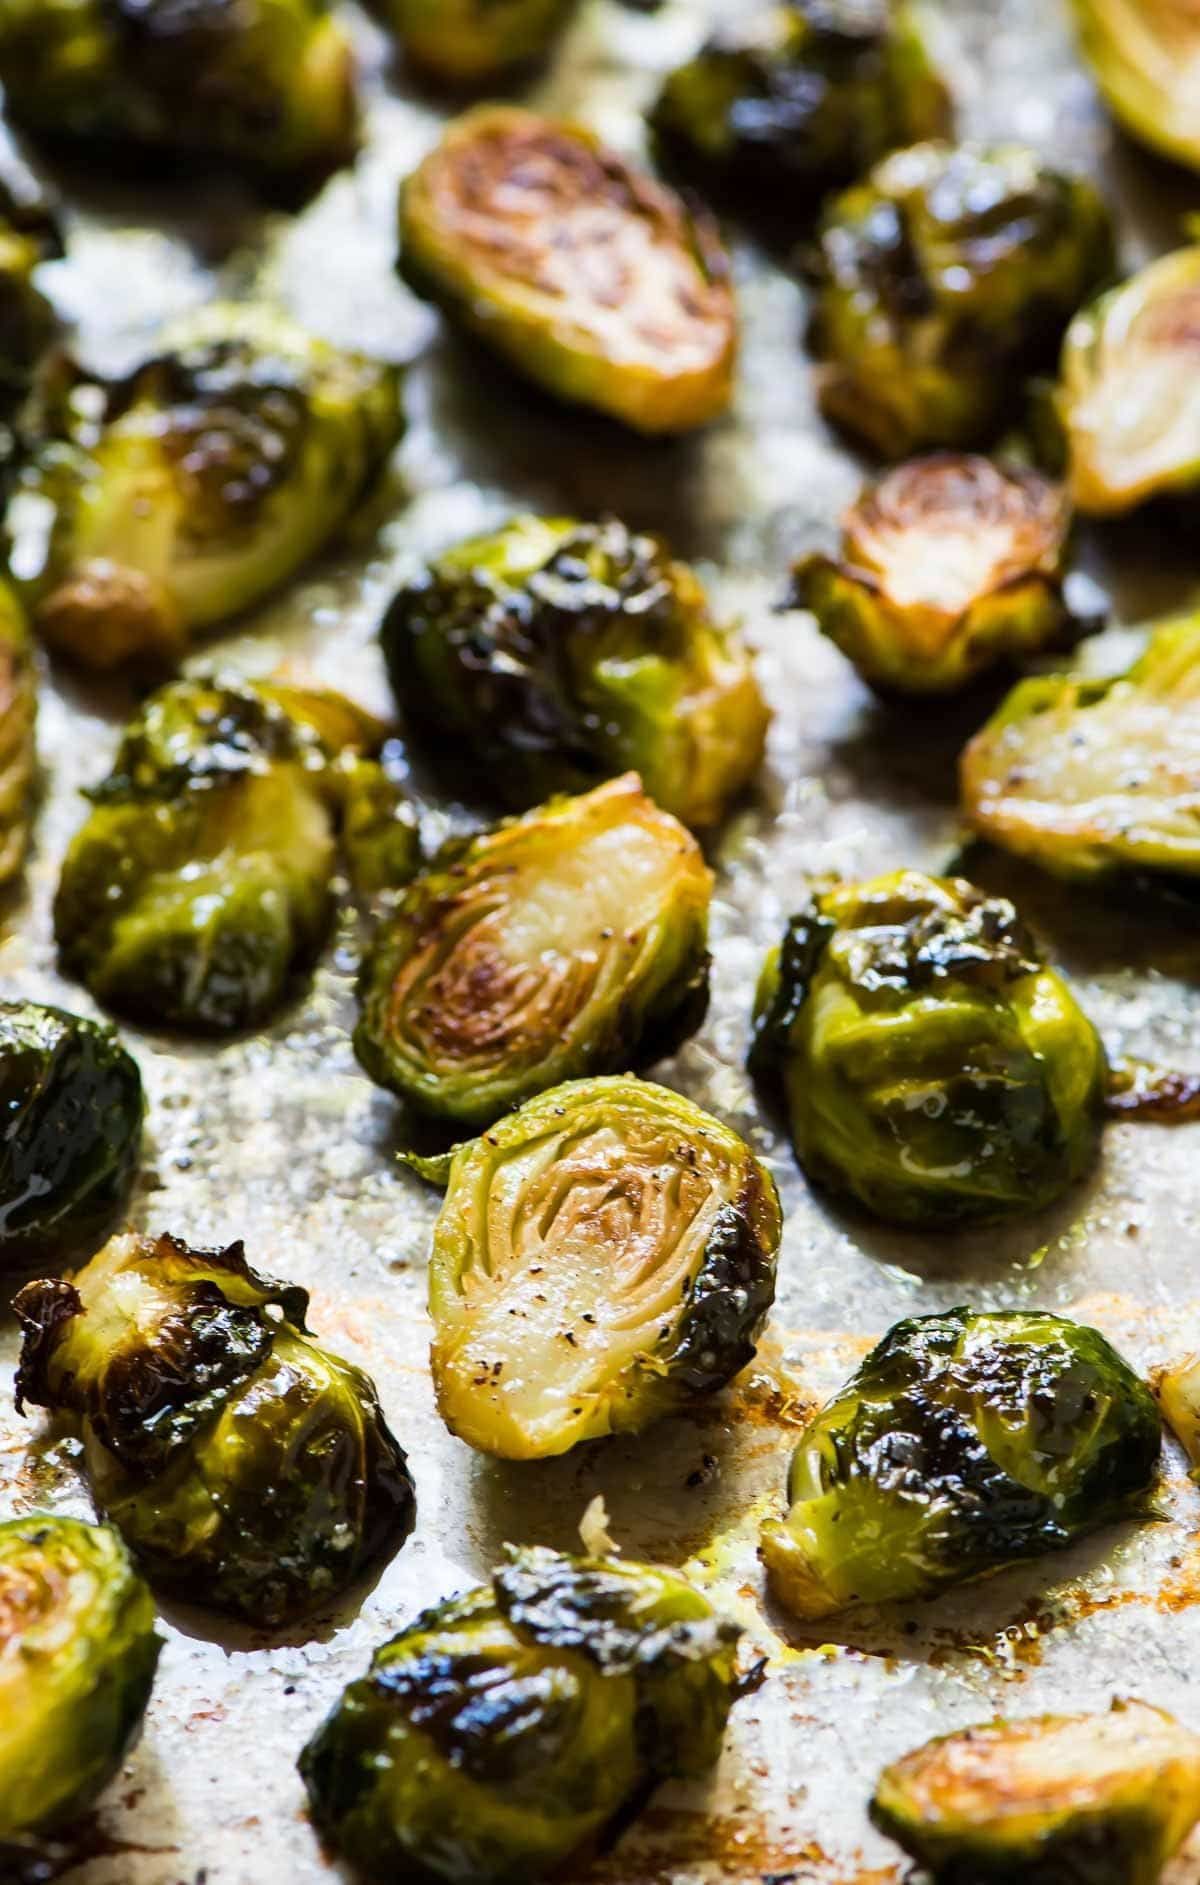 How Long To Cook Brussel Sprouts In Oven